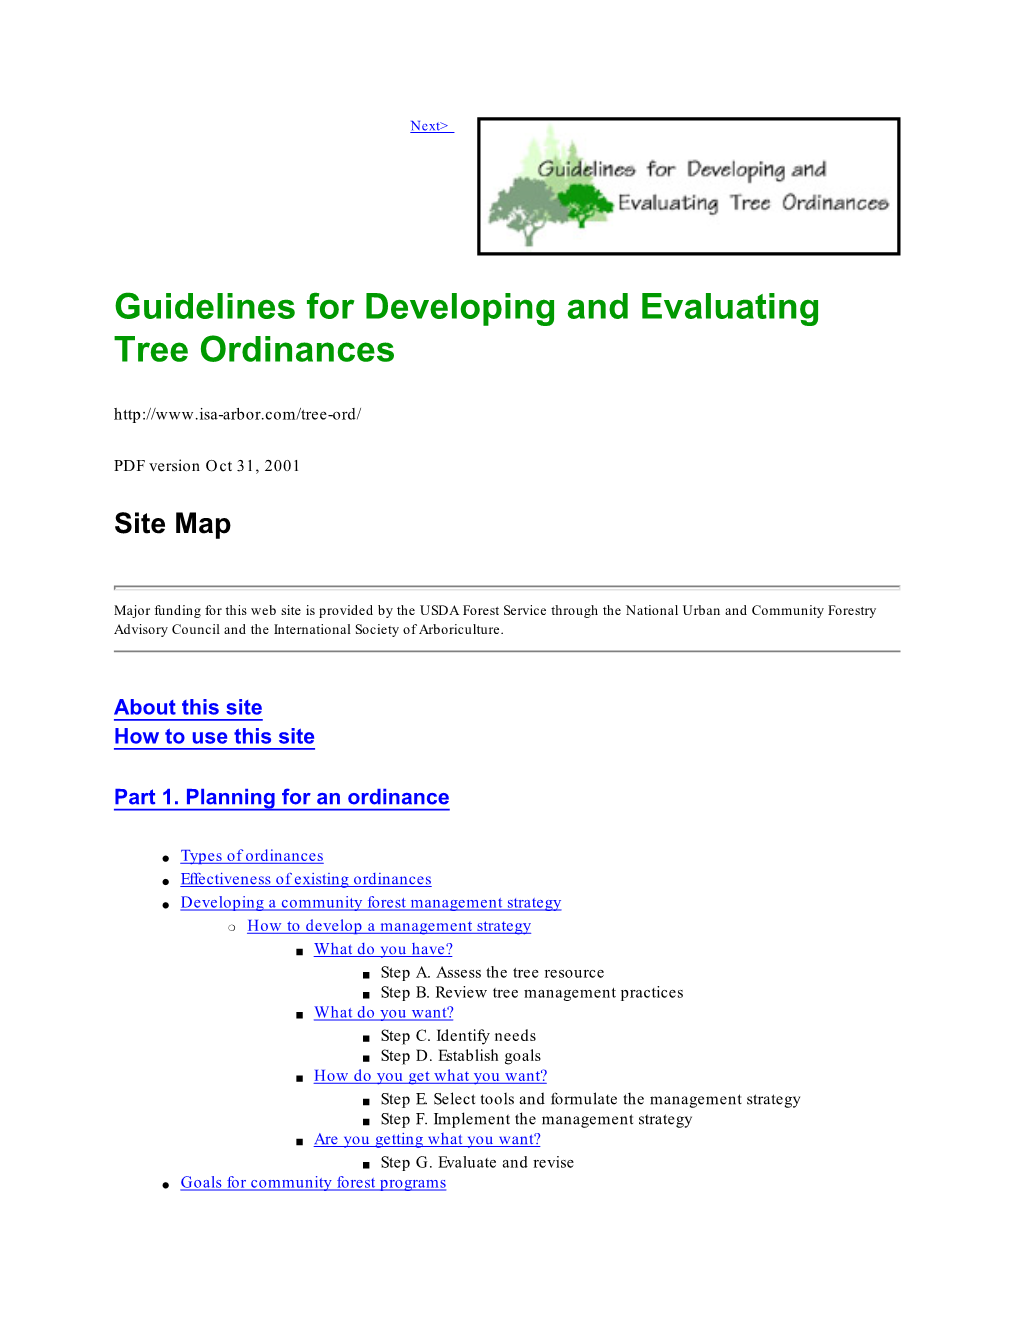 Guidelines for Developing and Evaluating Tree Ordinances